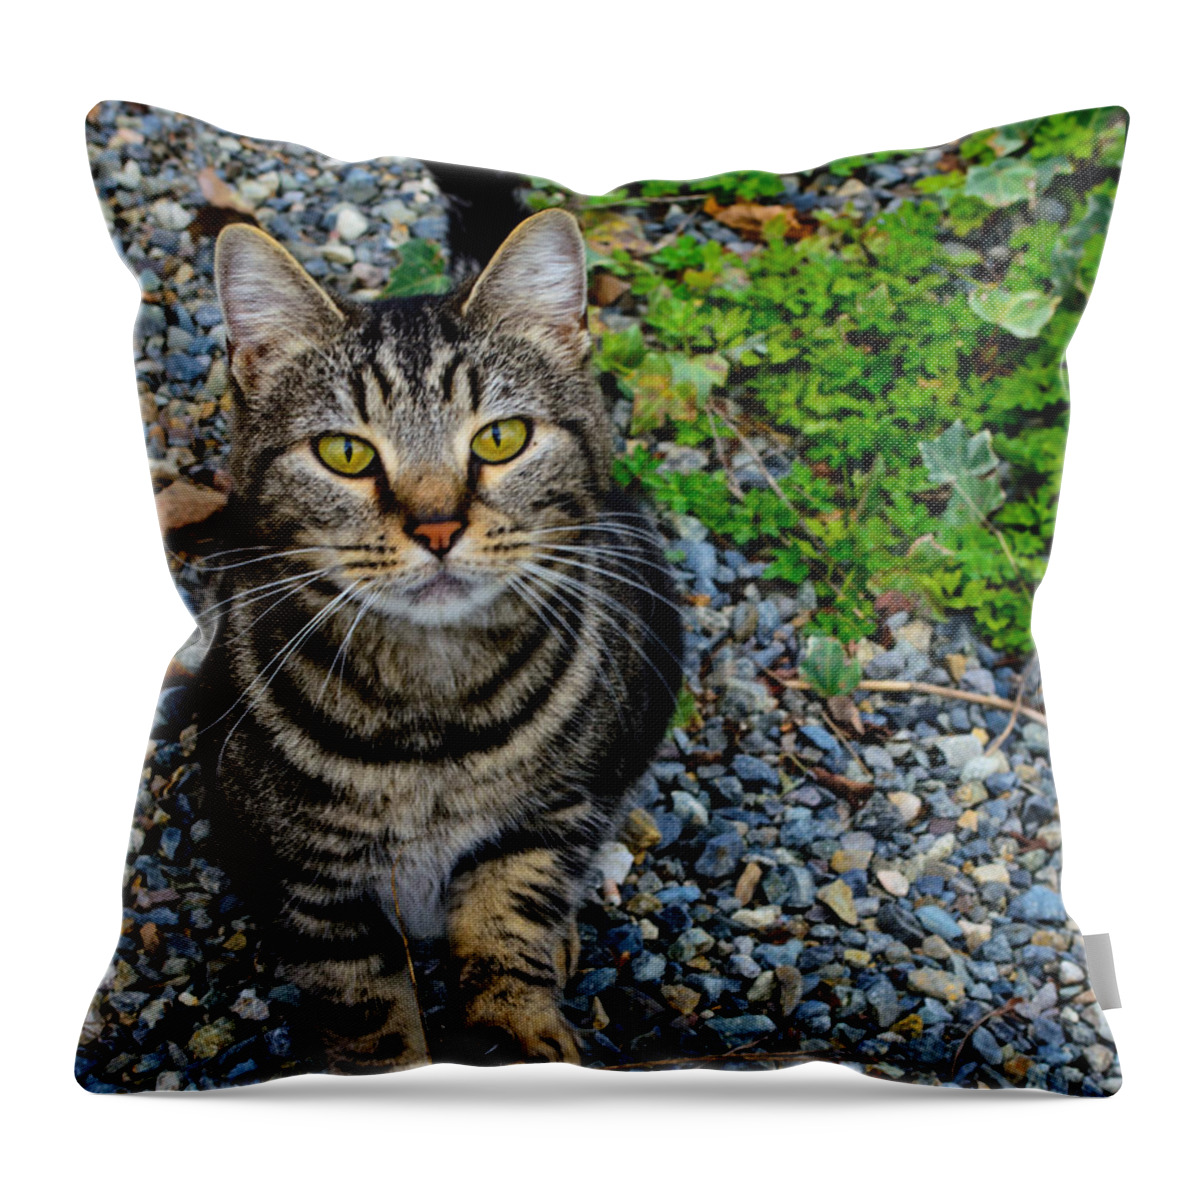 Feline Throw Pillow featuring the photograph Let's be friends by Tikvah's Hope